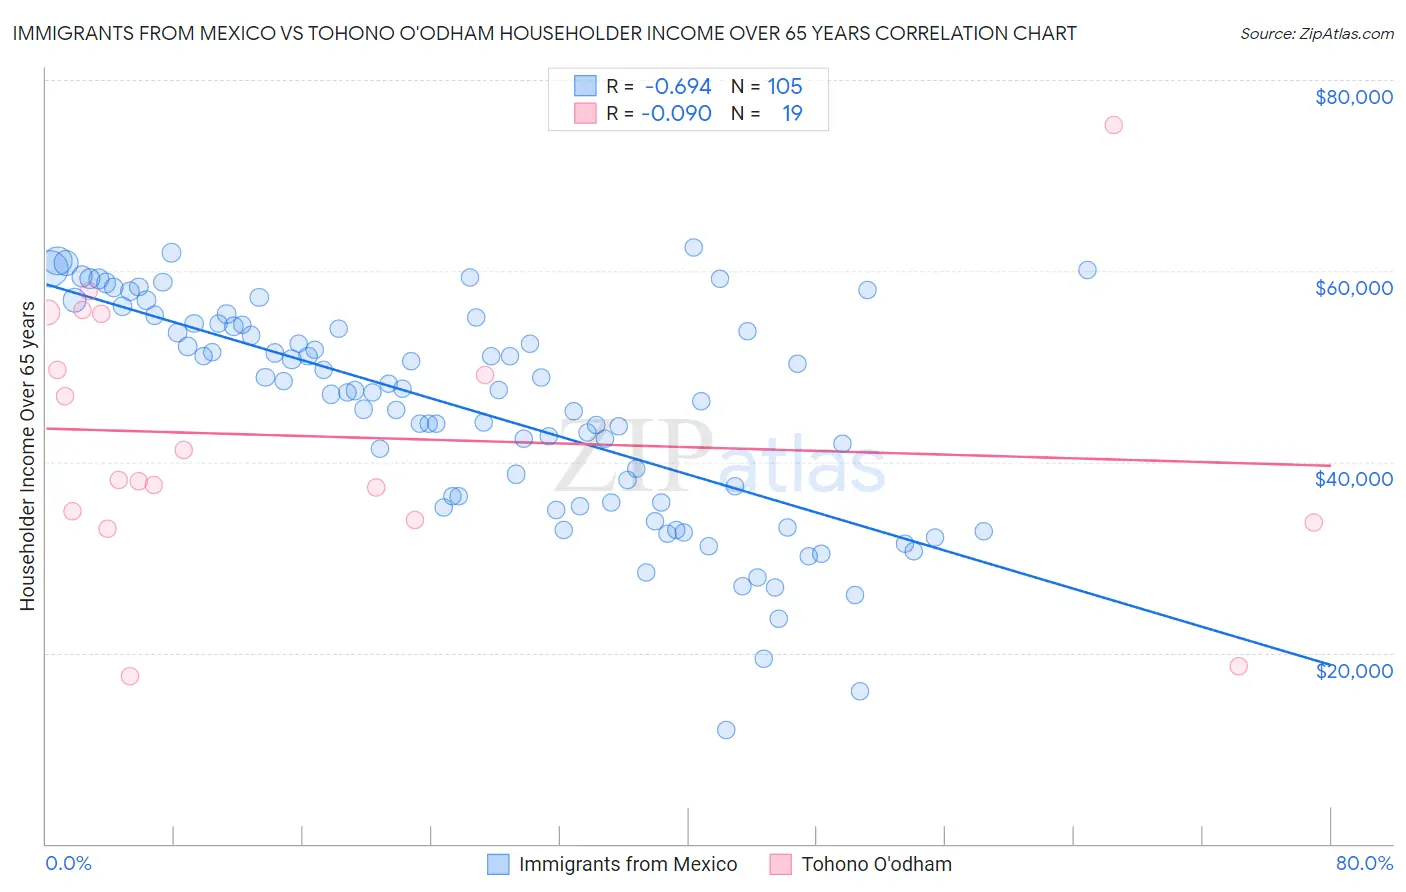 Immigrants from Mexico vs Tohono O'odham Householder Income Over 65 years